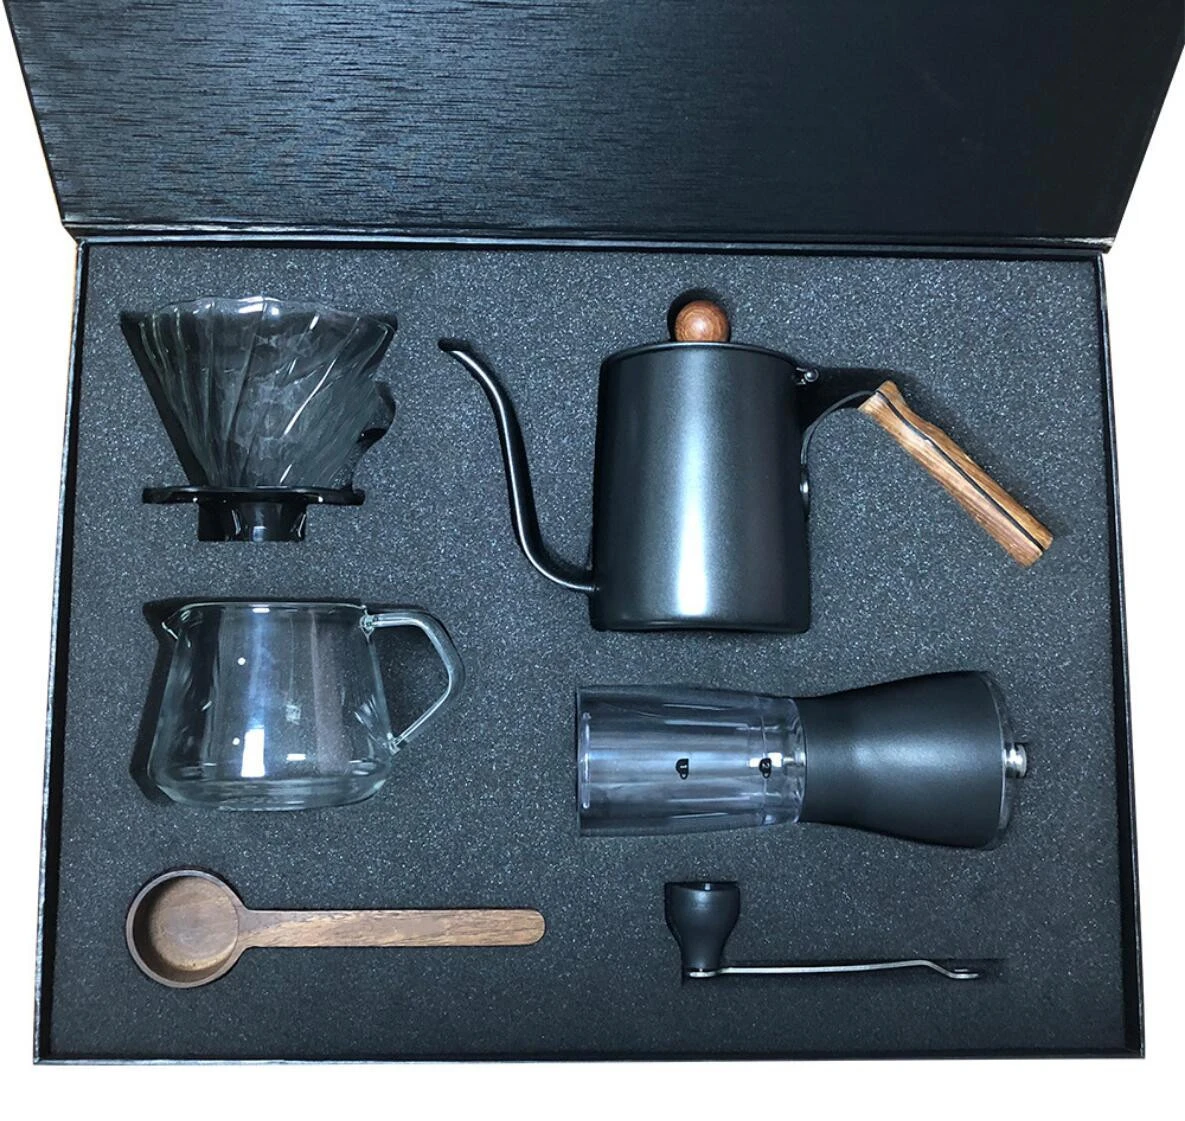 Amazon Hot Sale Pour Over Coffee Maker Set Hand Brew Coffee Suits 7pcs In Black Gift Box